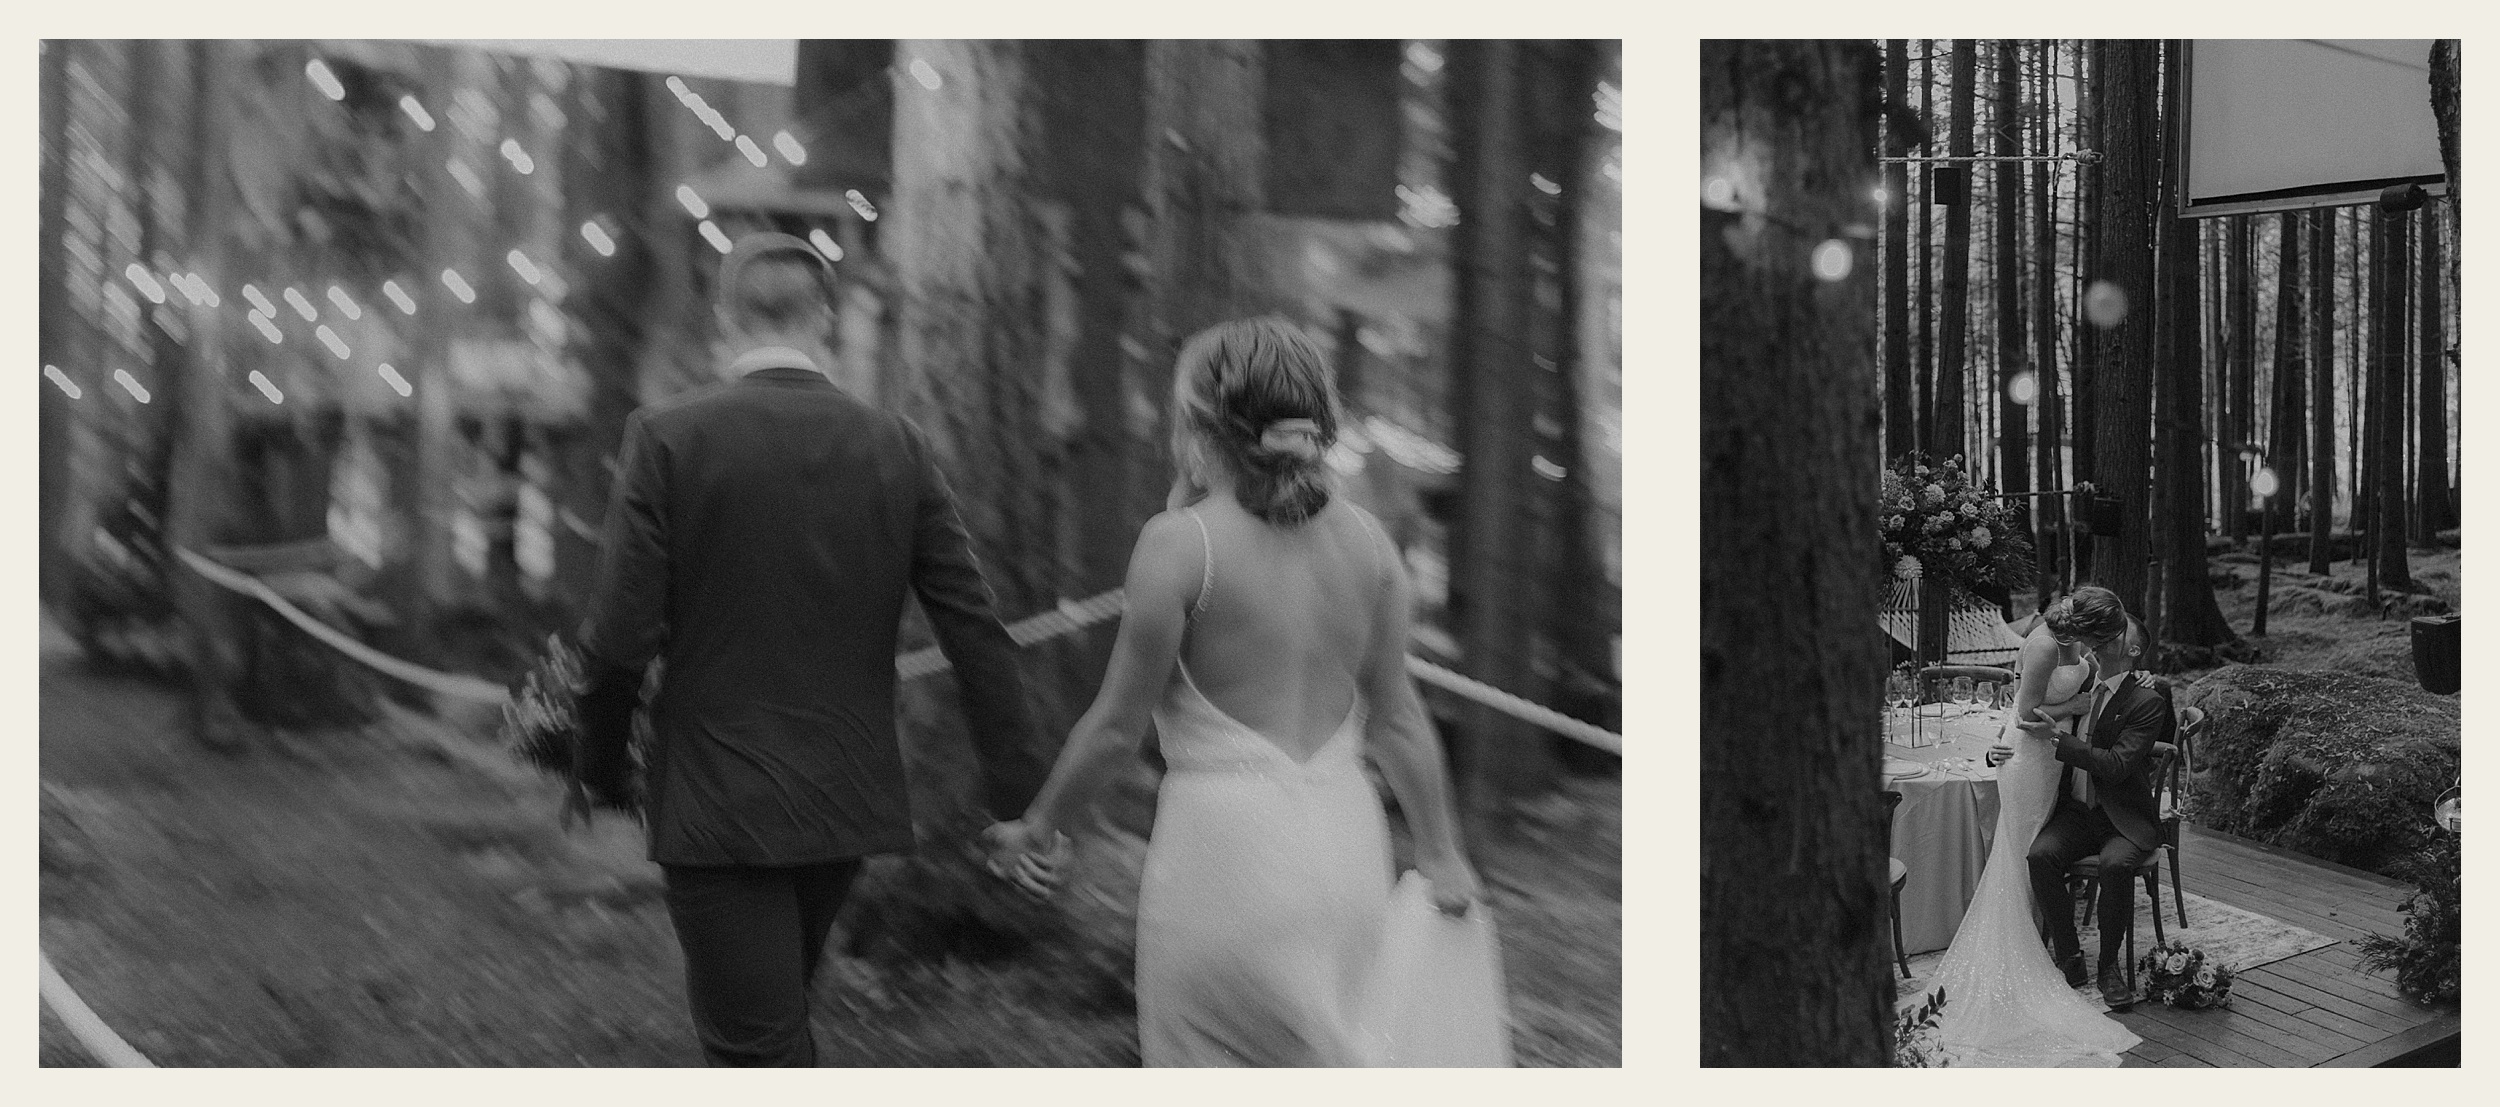 bride and groom walking together treehouse and emerald forest landscape

